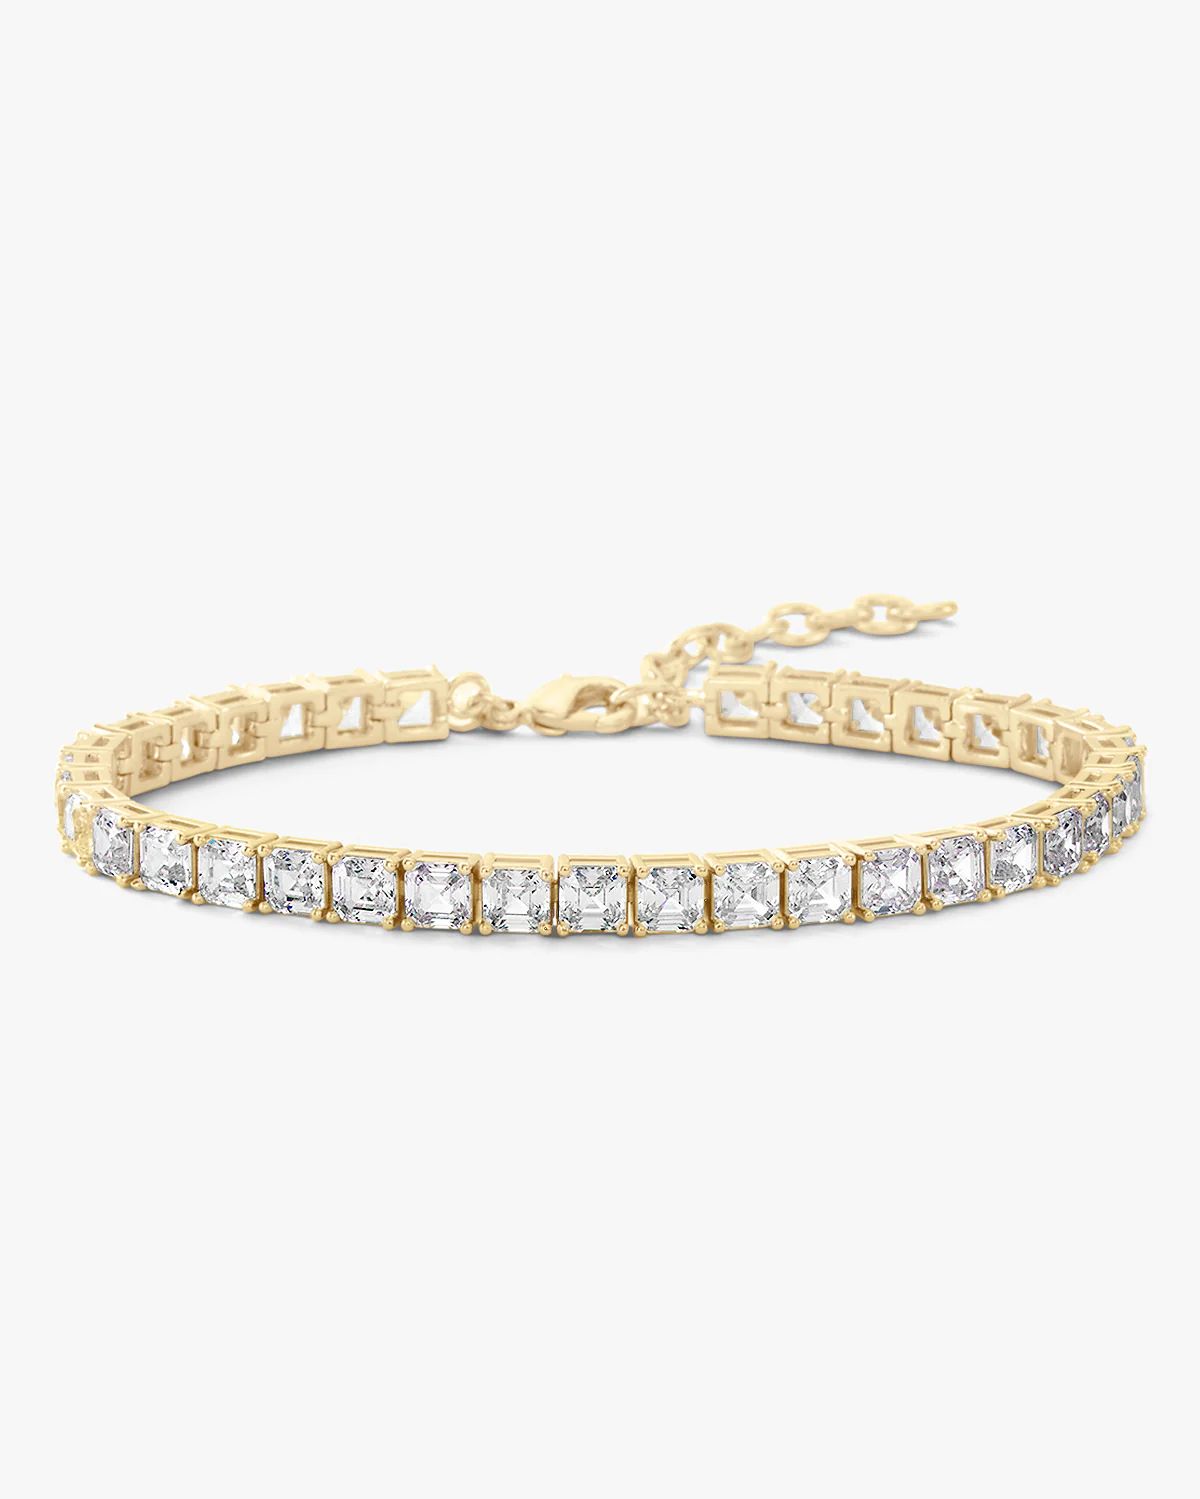 The Queen's Anklet | Melinda Maria